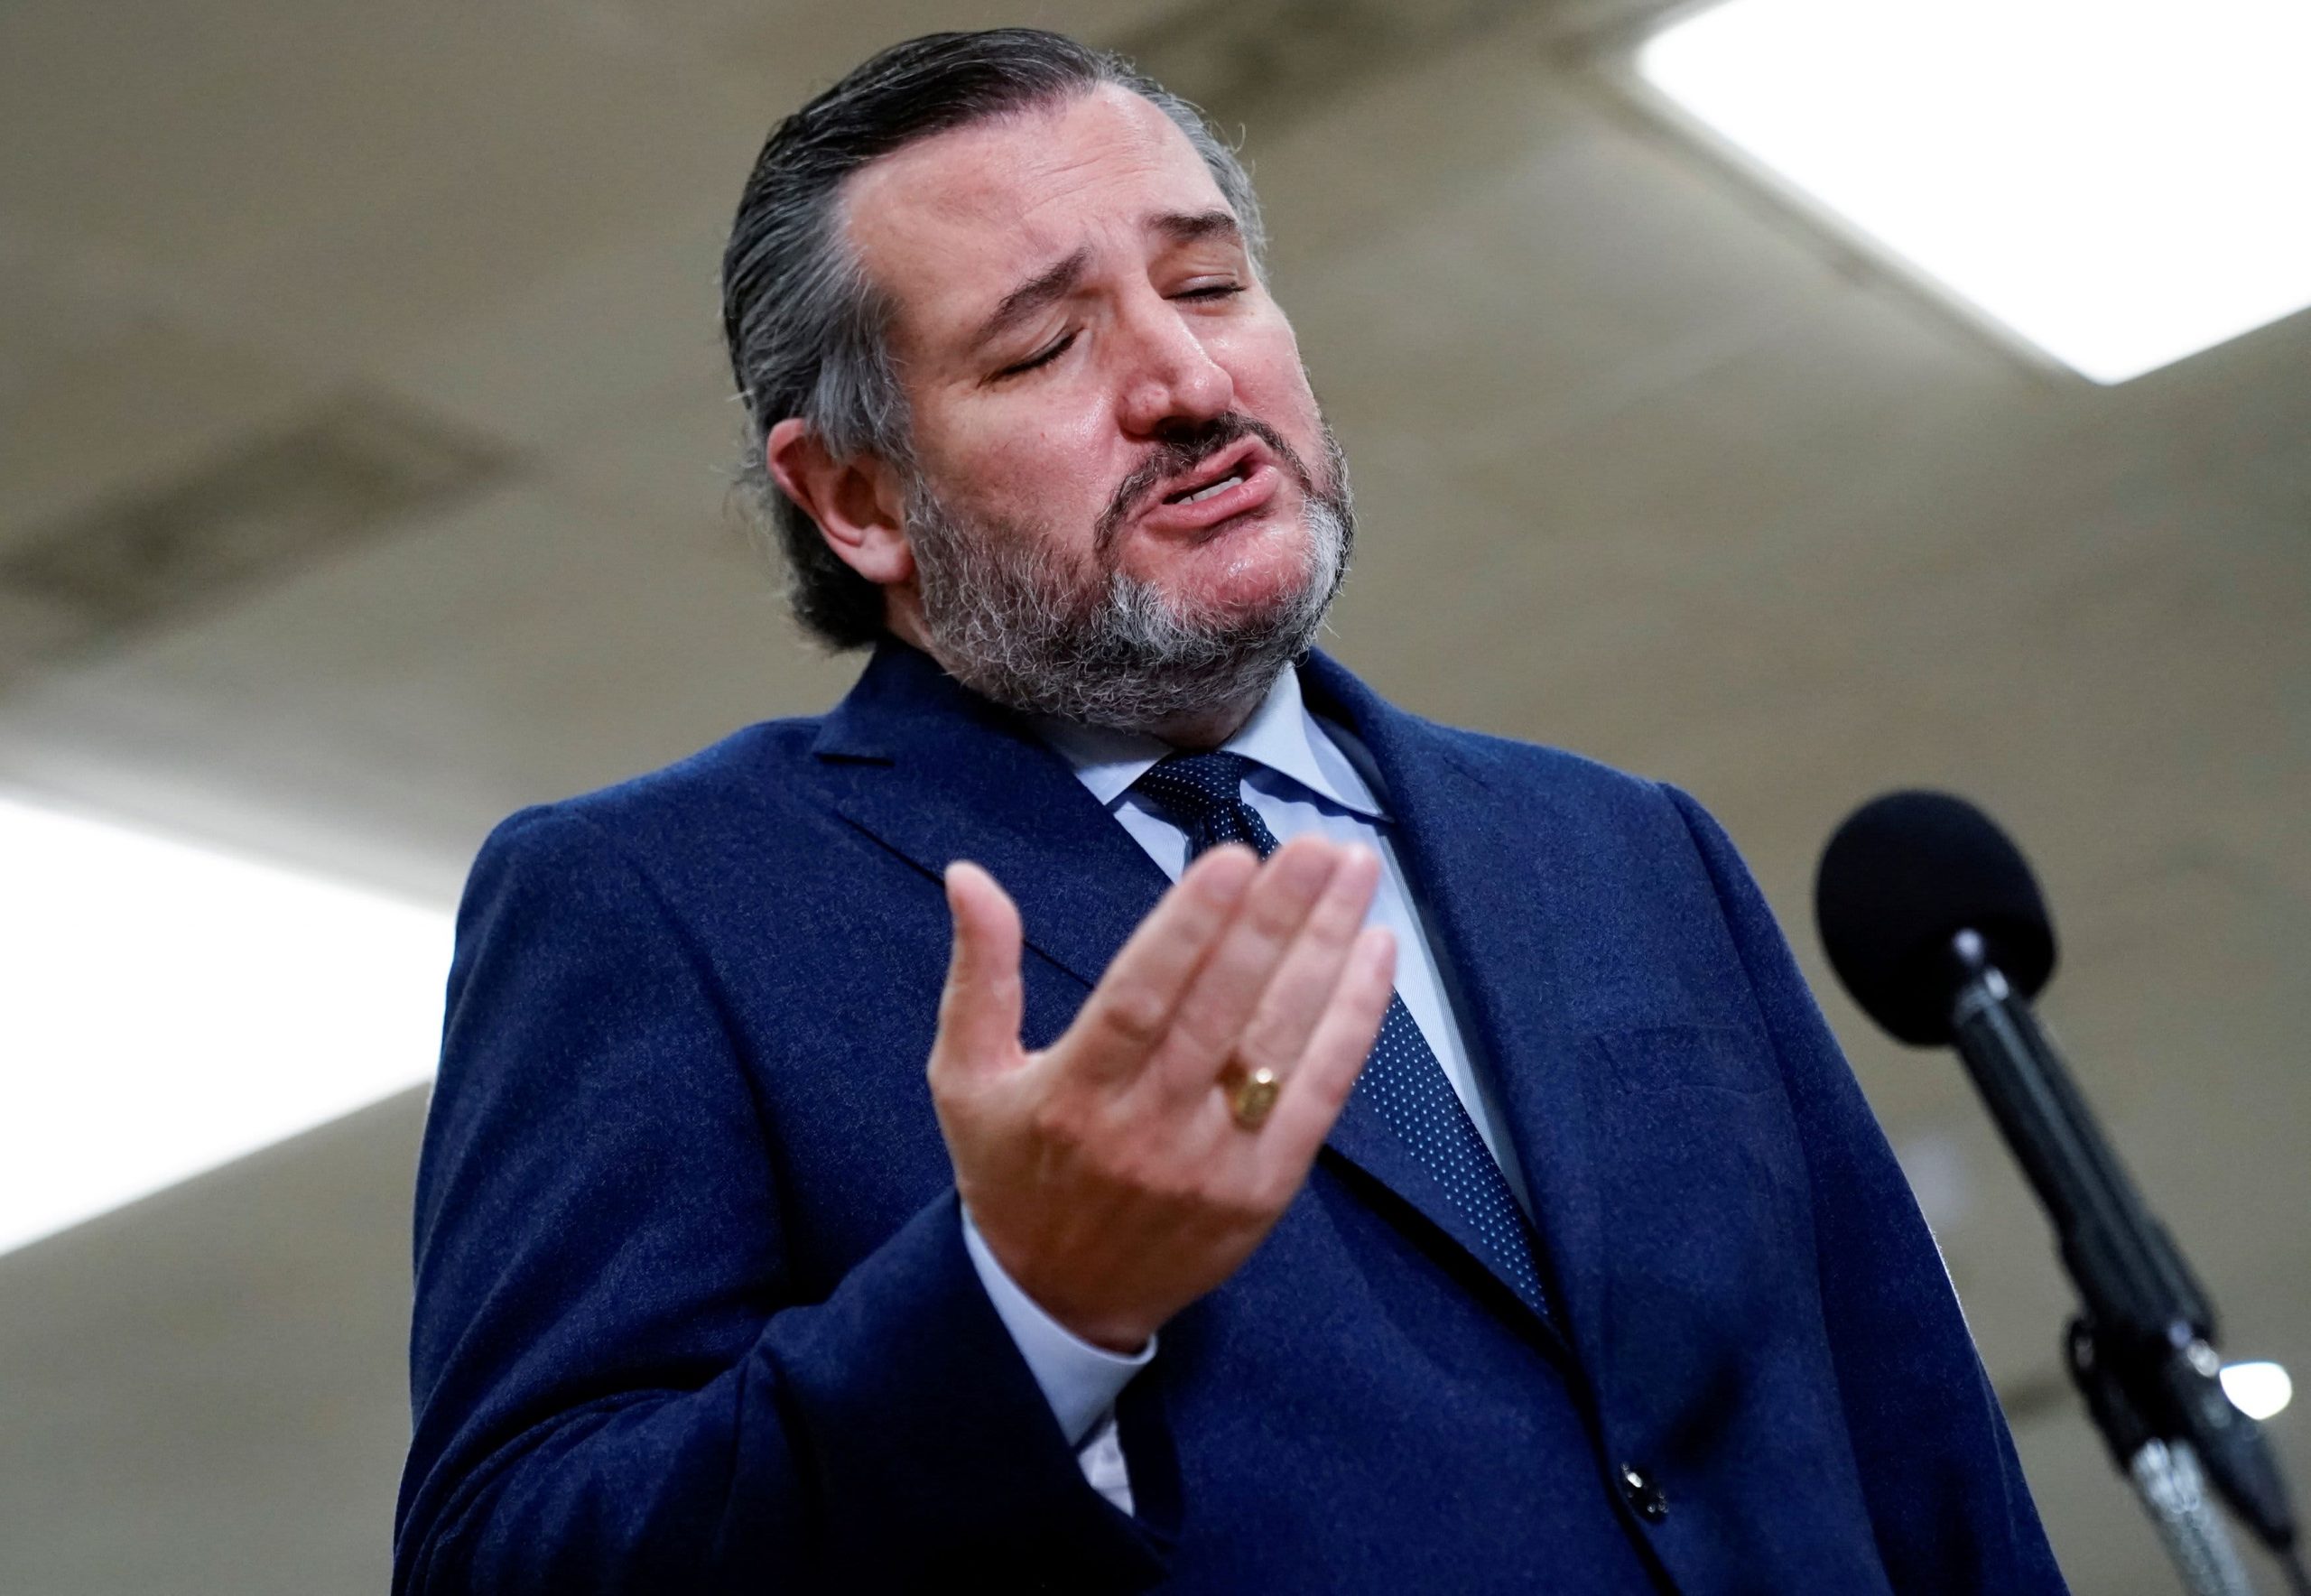 Sen. Ted Cruz will fly home from Cancun after fury over trip during Texas deep-freeze